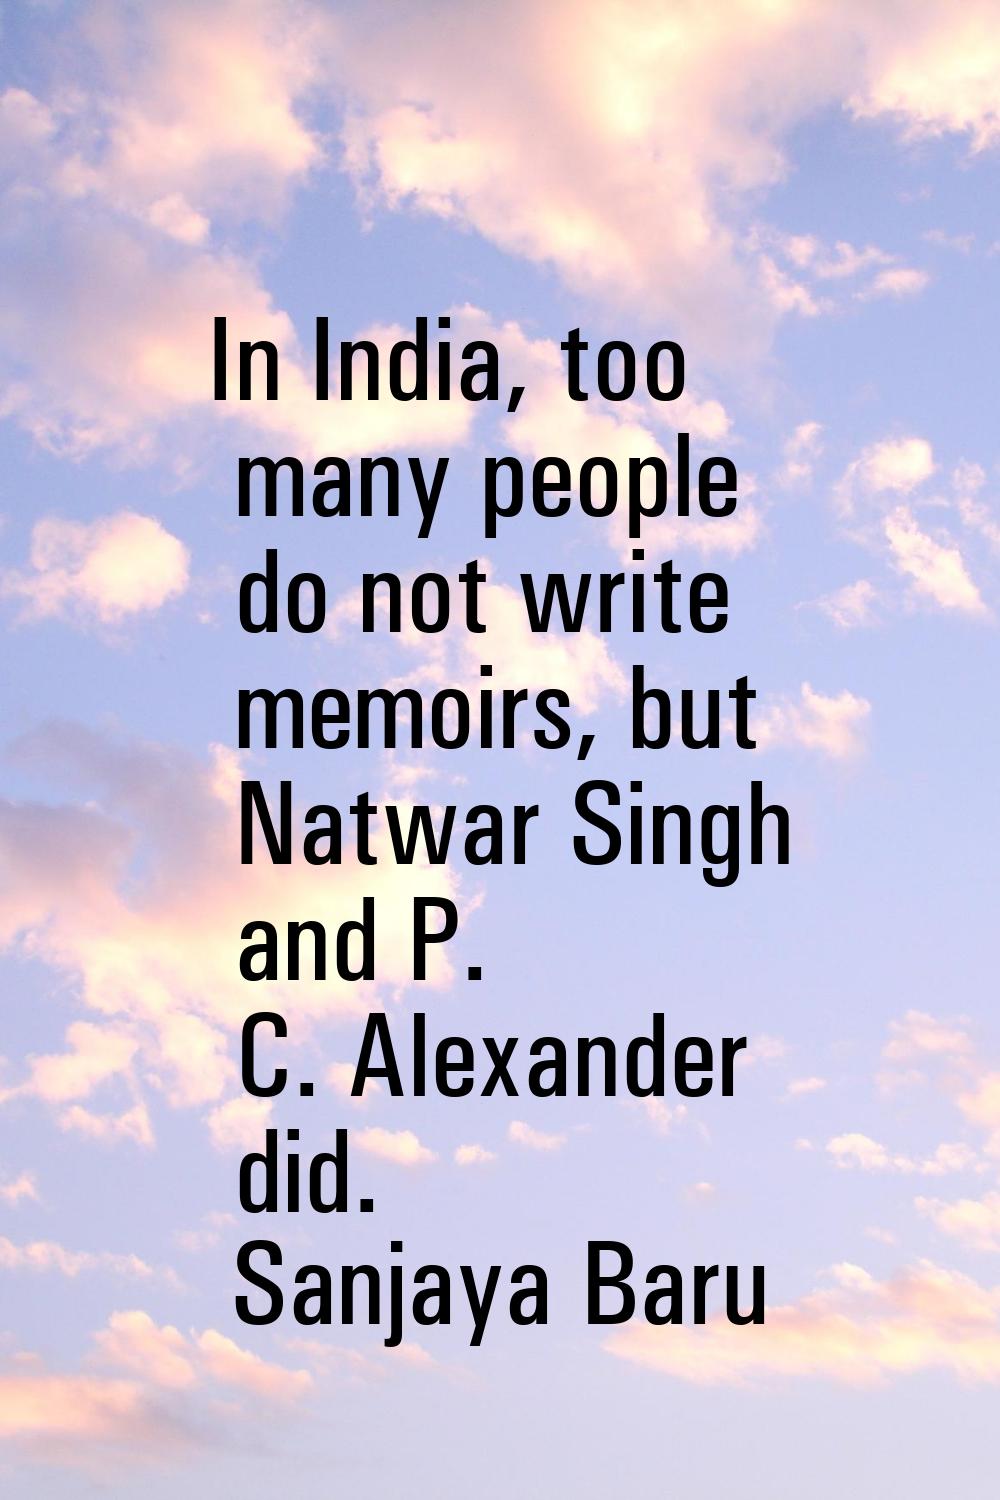 In India, too many people do not write memoirs, but Natwar Singh and P. C. Alexander did.